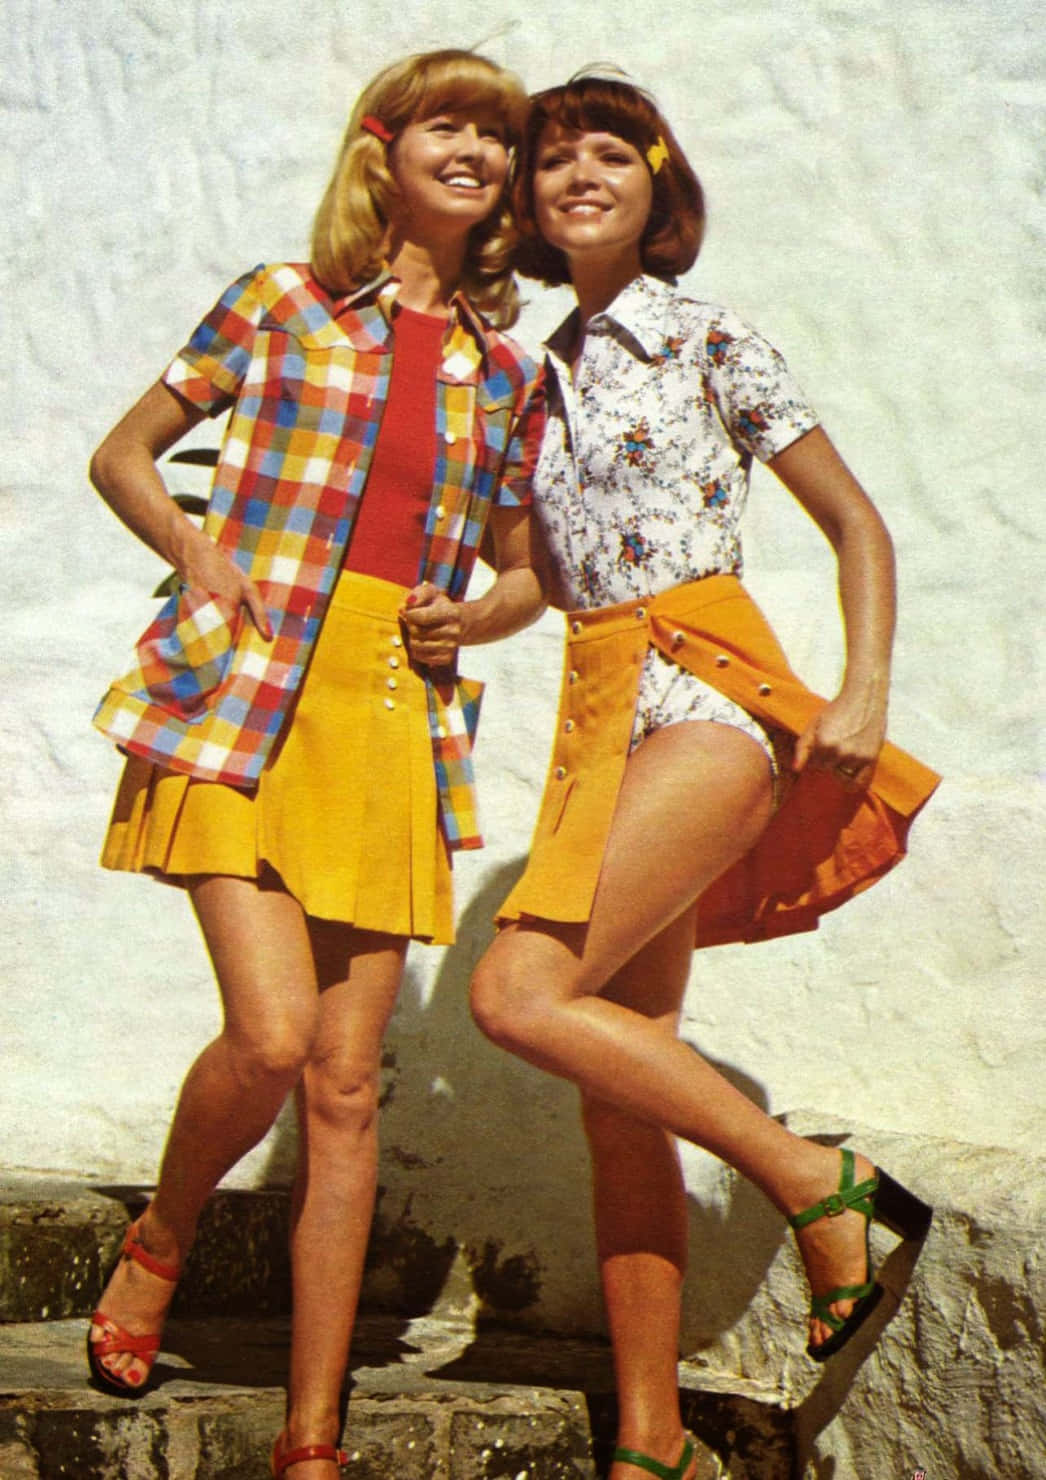 The 70s Look: Bold Colors and Alternative Style